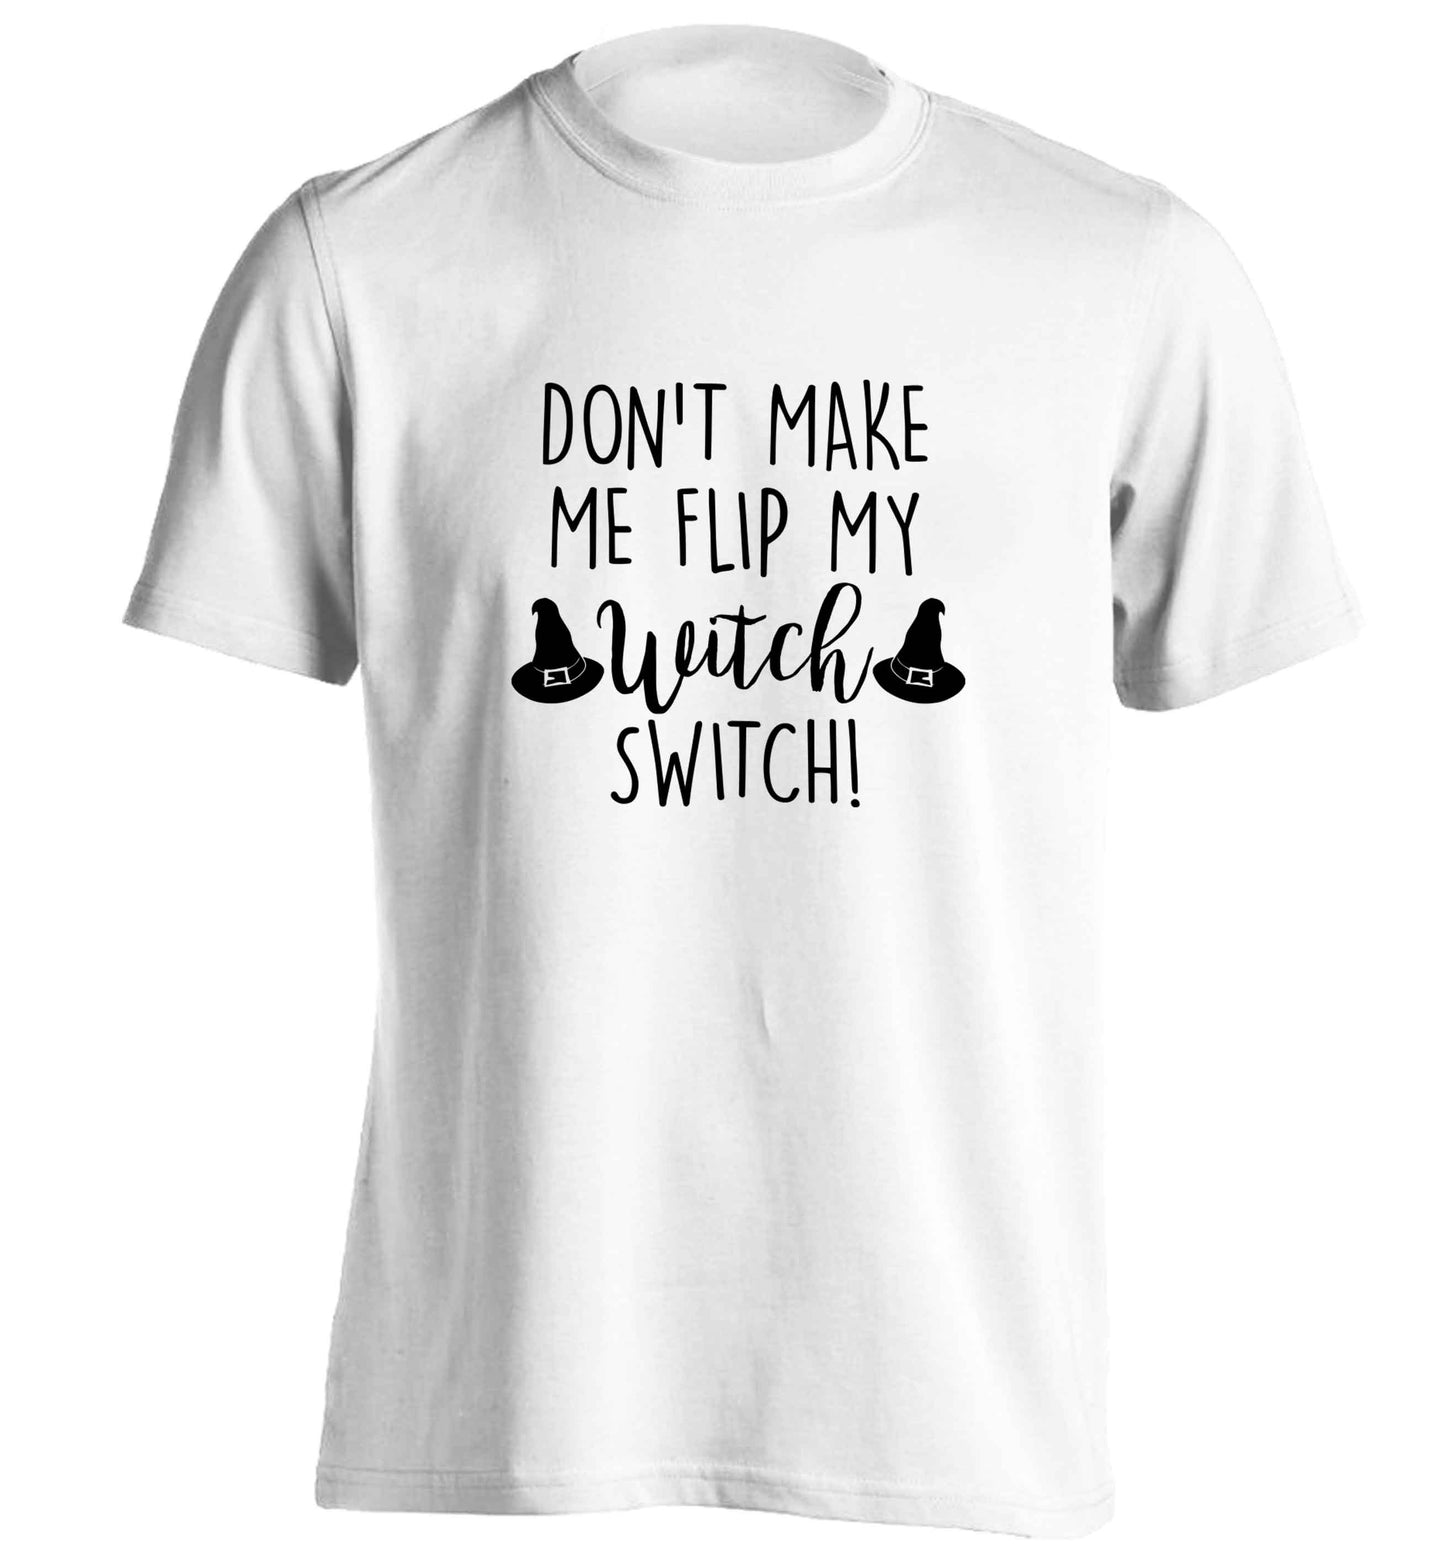 Don't make me flip my witch switch adults unisex white Tshirt 2XL